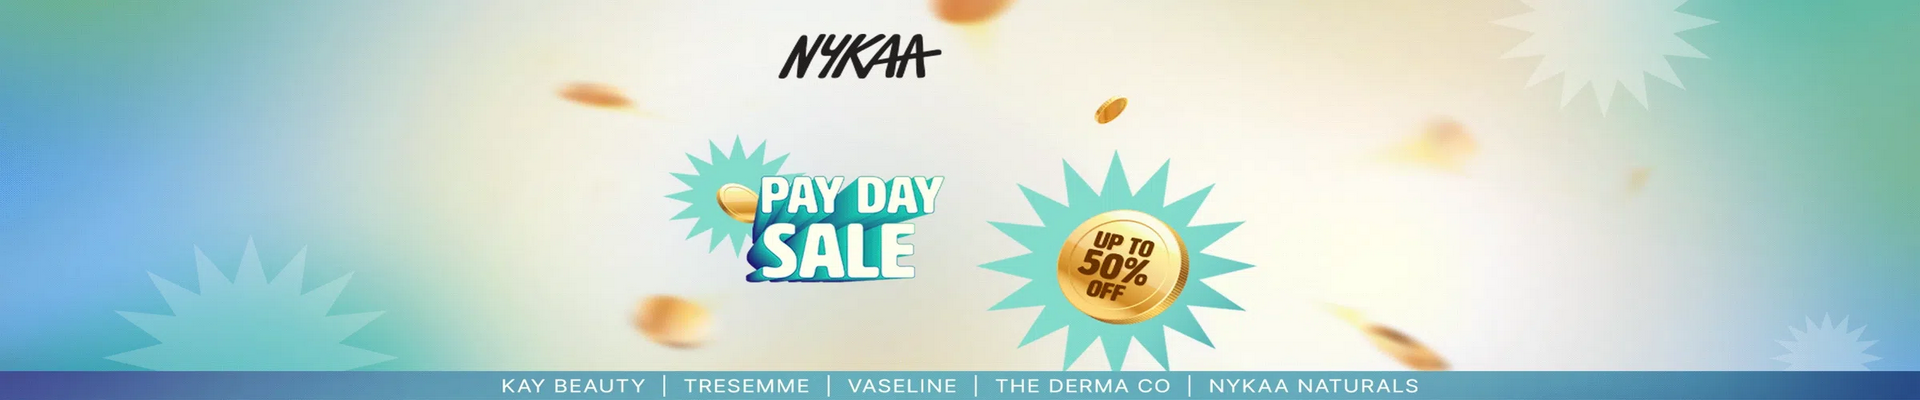 911856374payday-sale.png